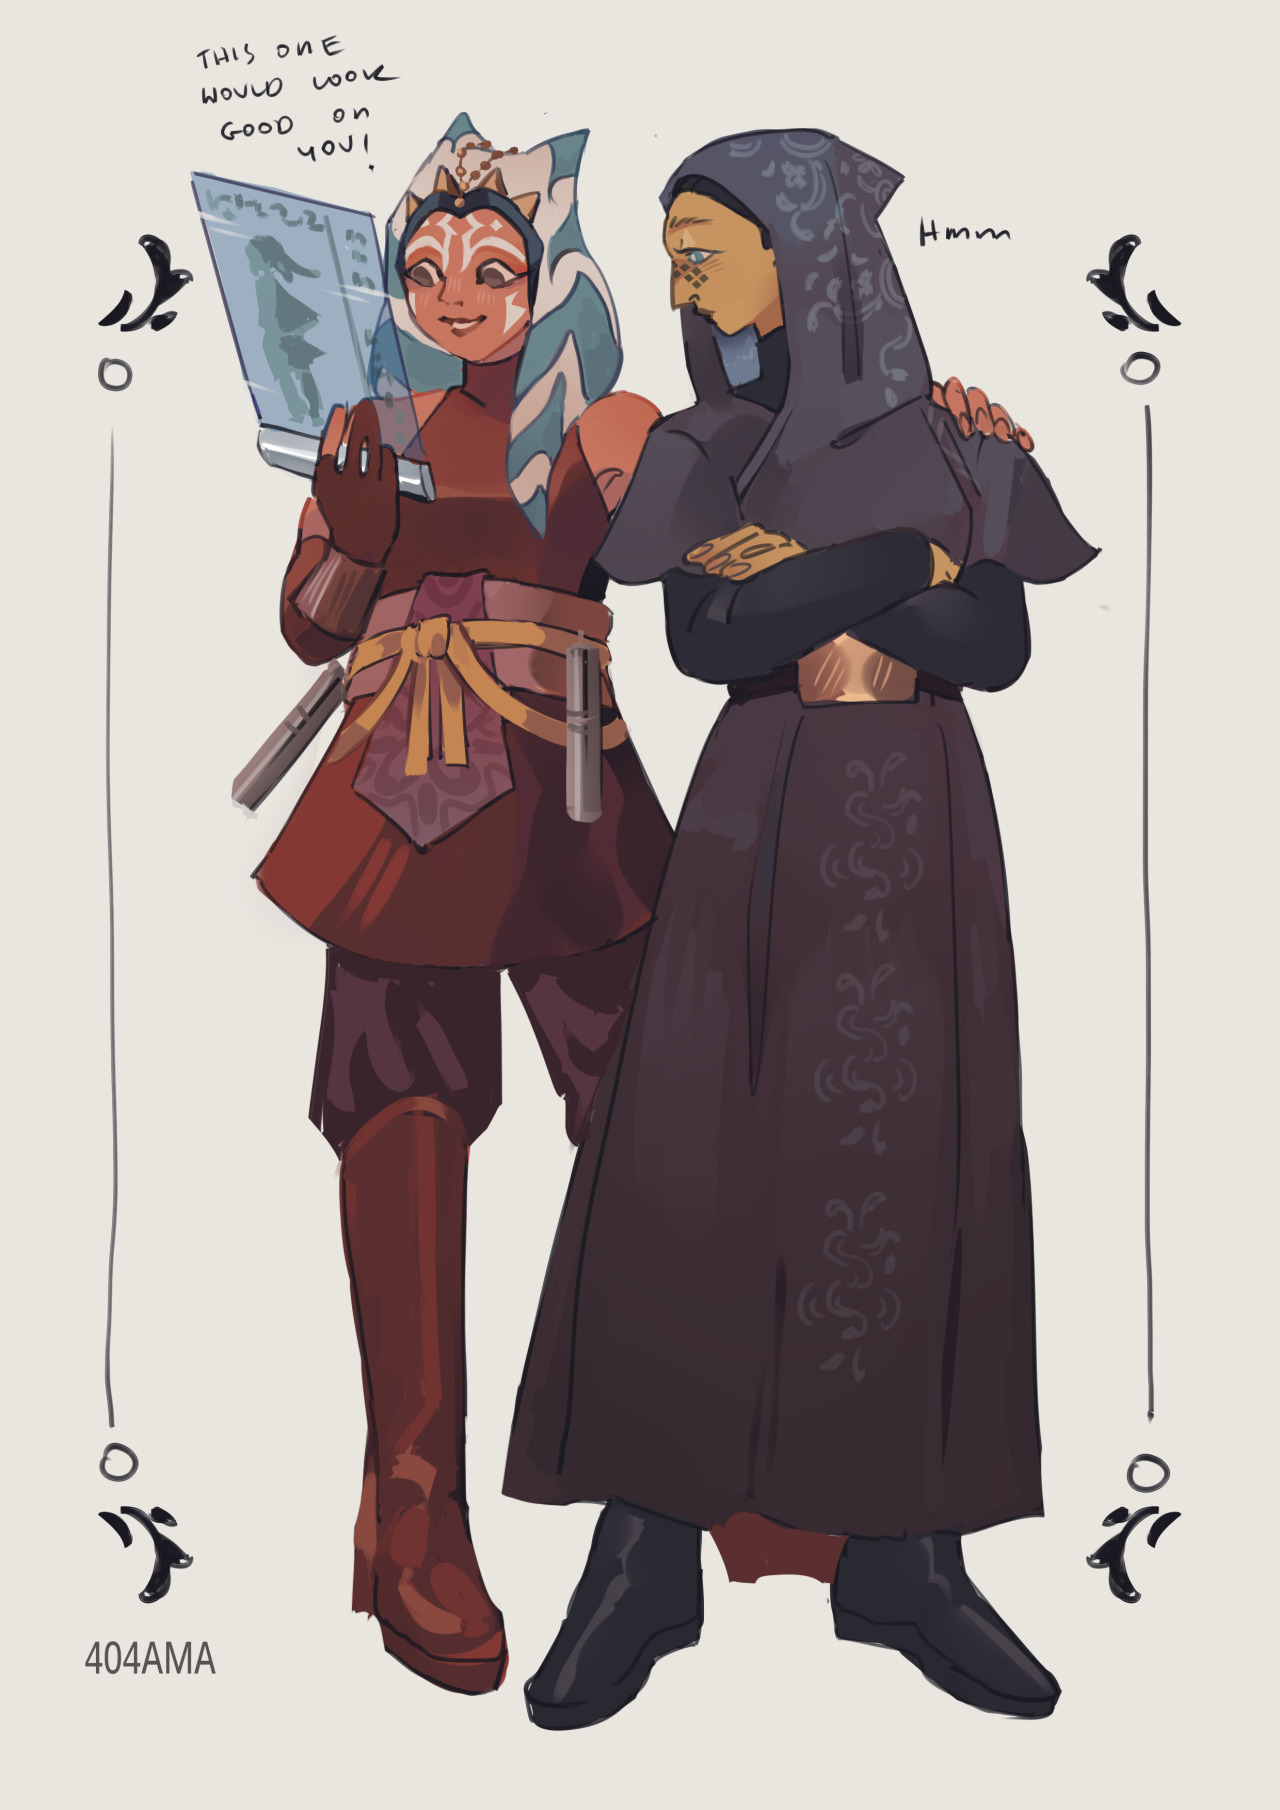 I just wanted them to hang out more!!!! ✨🌙  ART LOG ->  @404ama #star wars #sw the clone wars #ahsoka tano#barriss offee#barrissoka#sw fanart #star wars fanart #art